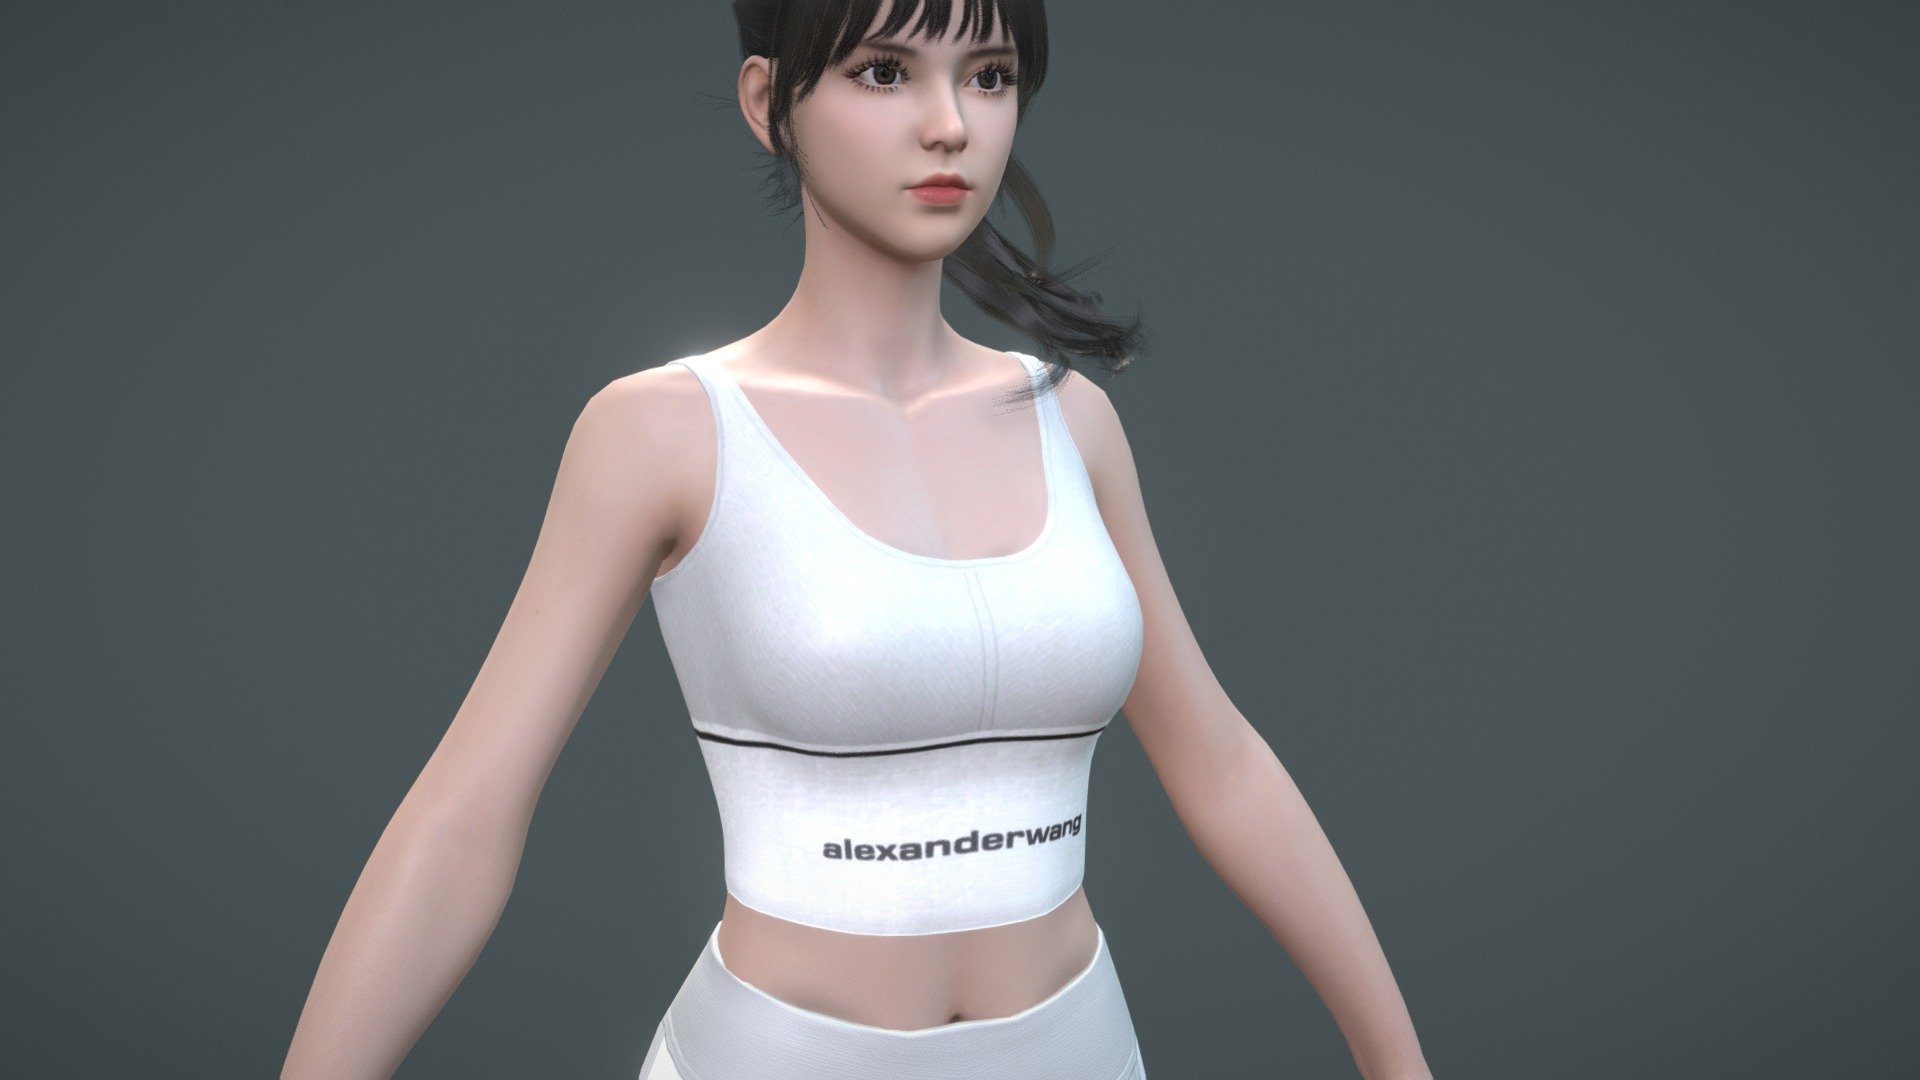 Female Character Fitness yoga sport suit game assets

There are 8 UVs in total: Face 4096, Body 4096 Eyes 1024 Eyebrows 2048 Eyelashes top 2048 pants 2048  Shoes 4096.

The skin uses the Specular pbr texture , and the equipment part uses the metalness pbr texture .

The compressed package contains the maya file, the FBX file, the dea file,the obj fileand all the texture files.

The skin part covered by the body is intact, the model is not deleted.

Hope you like my work~Thank you ,have a nice day.

If you need  Highpoly female base mesh please visit:https://sketchfab.com/3d-models/realistic-3-characters-man-woman-child-highpoly-0c51abd24b4342c292e891730a907459 - Fitness yoga sportwear suit game assets - Buy Royalty Free 3D model by Vincent Page (@vincentpage) 3d model